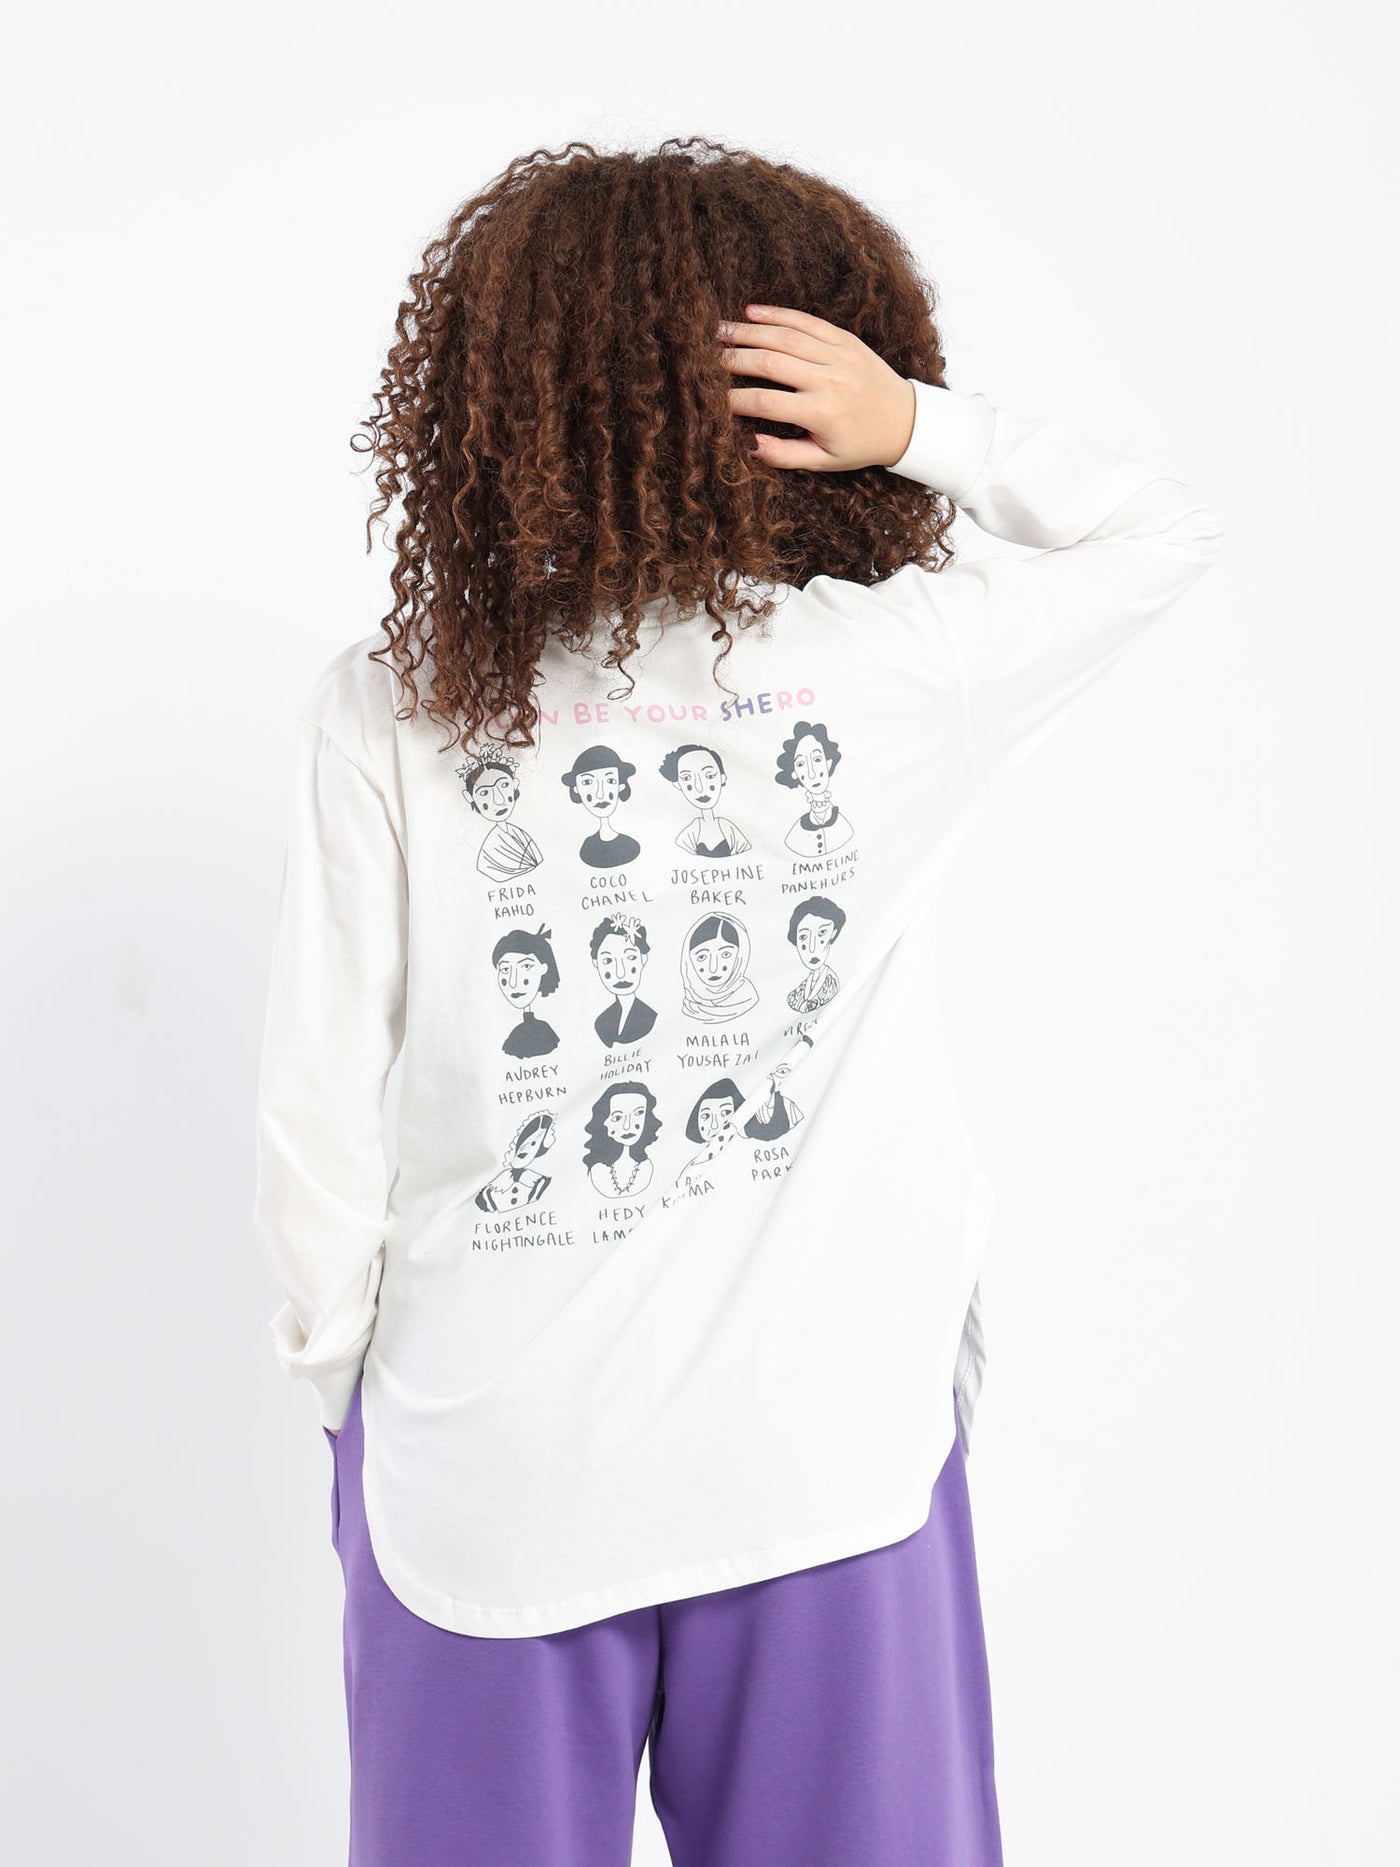 T-Shirt - "  I Can Be Your Shero" Print - Long  Sleeves